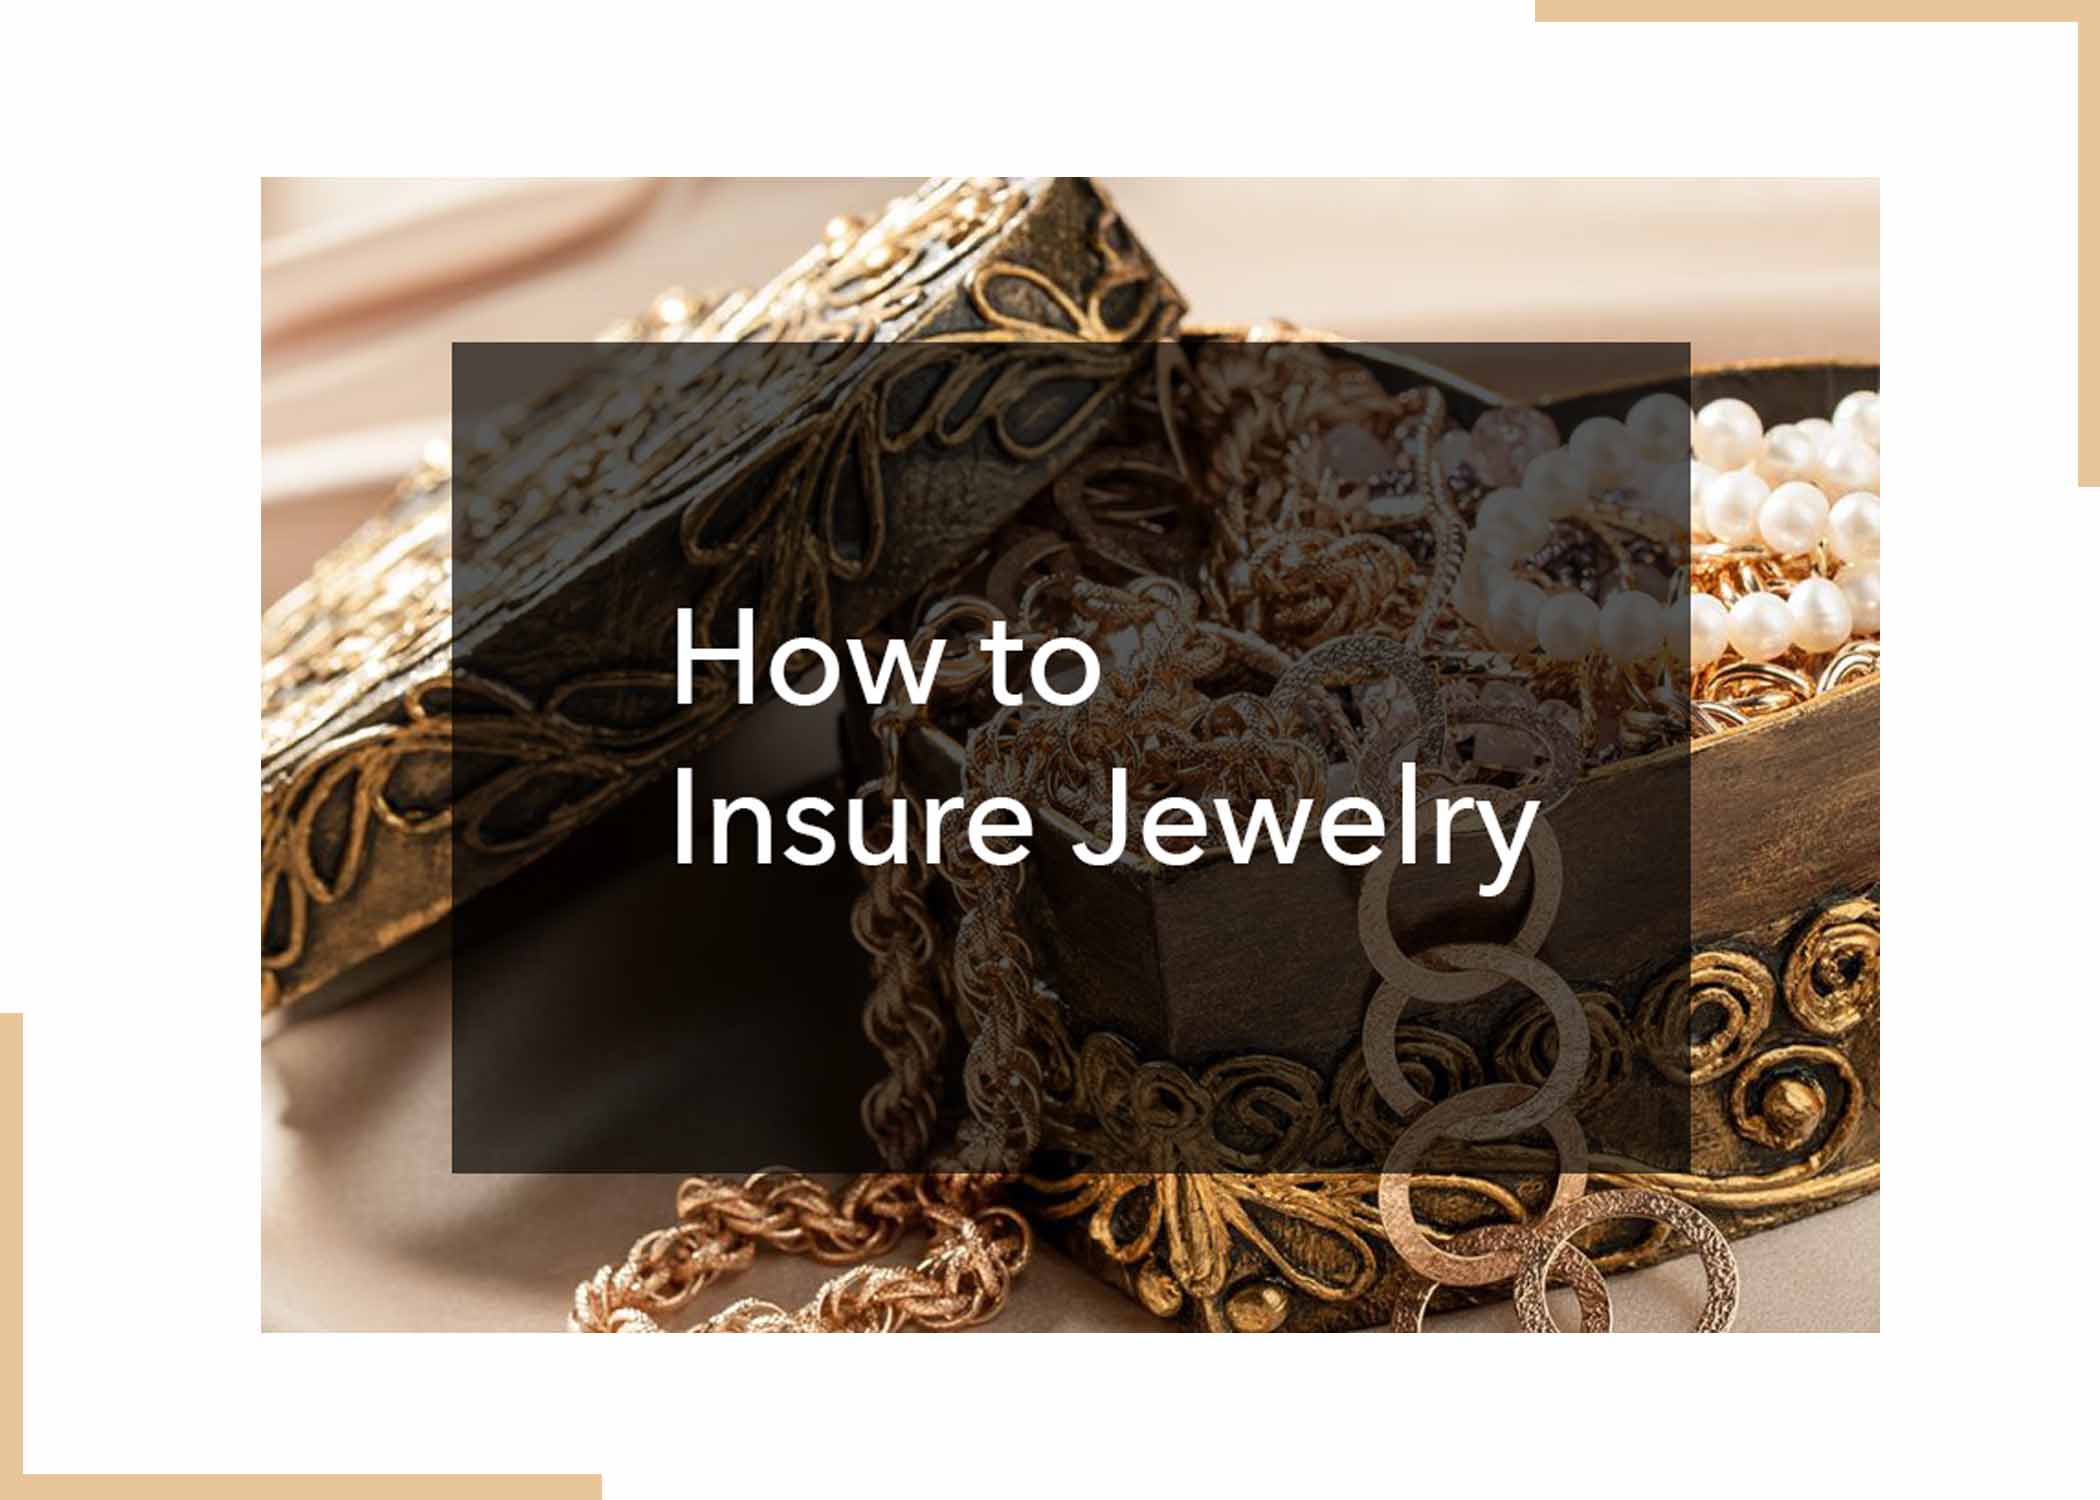 How to Insure Jewelry